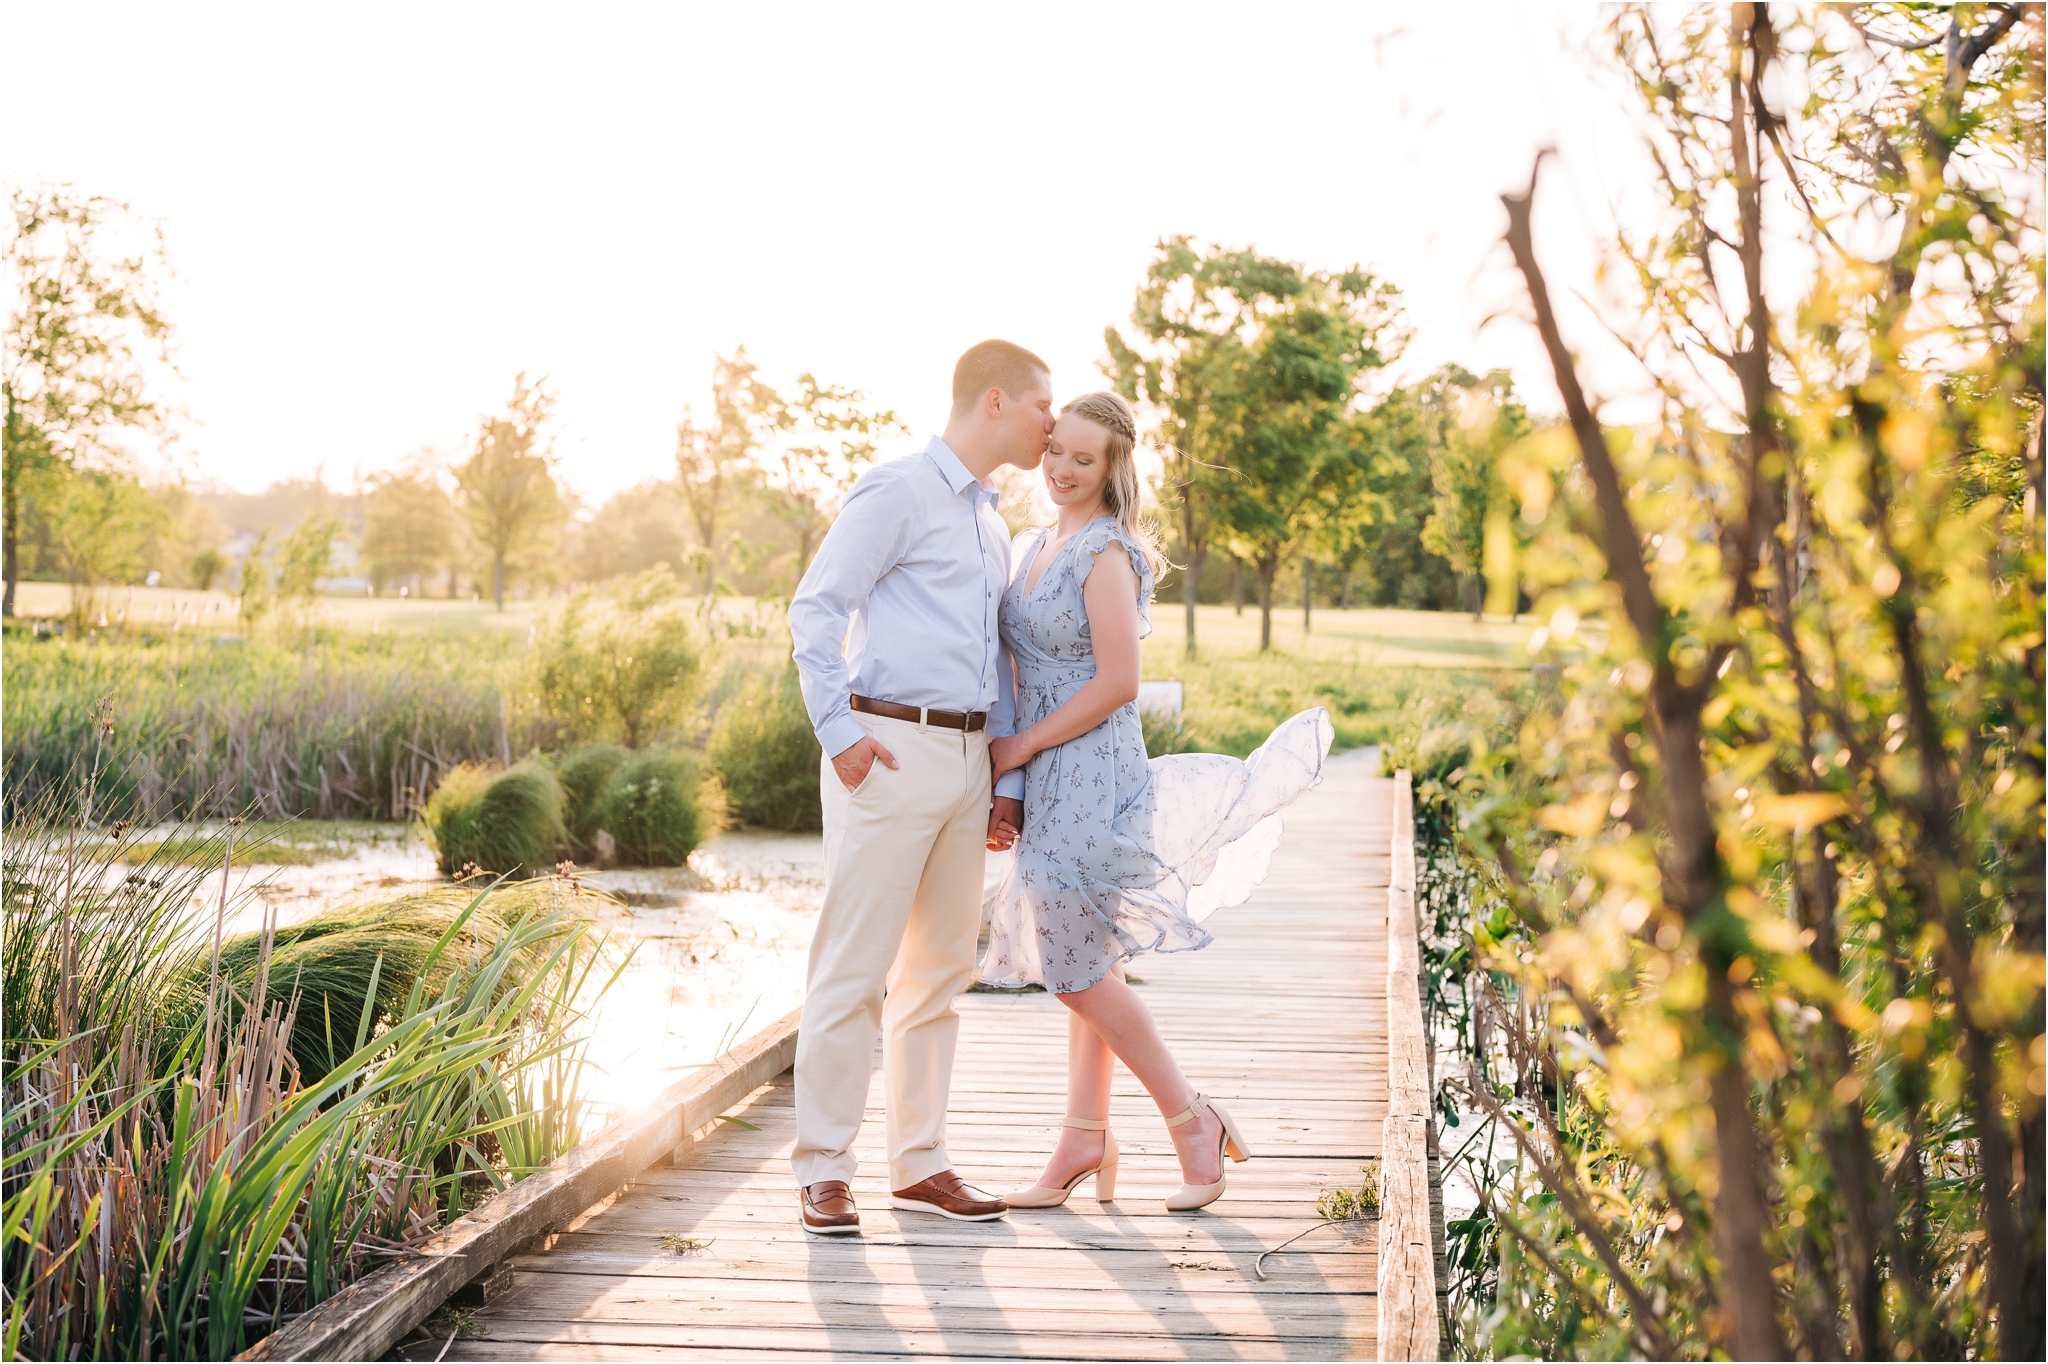 Golden hour photos with beautiful engaged couple